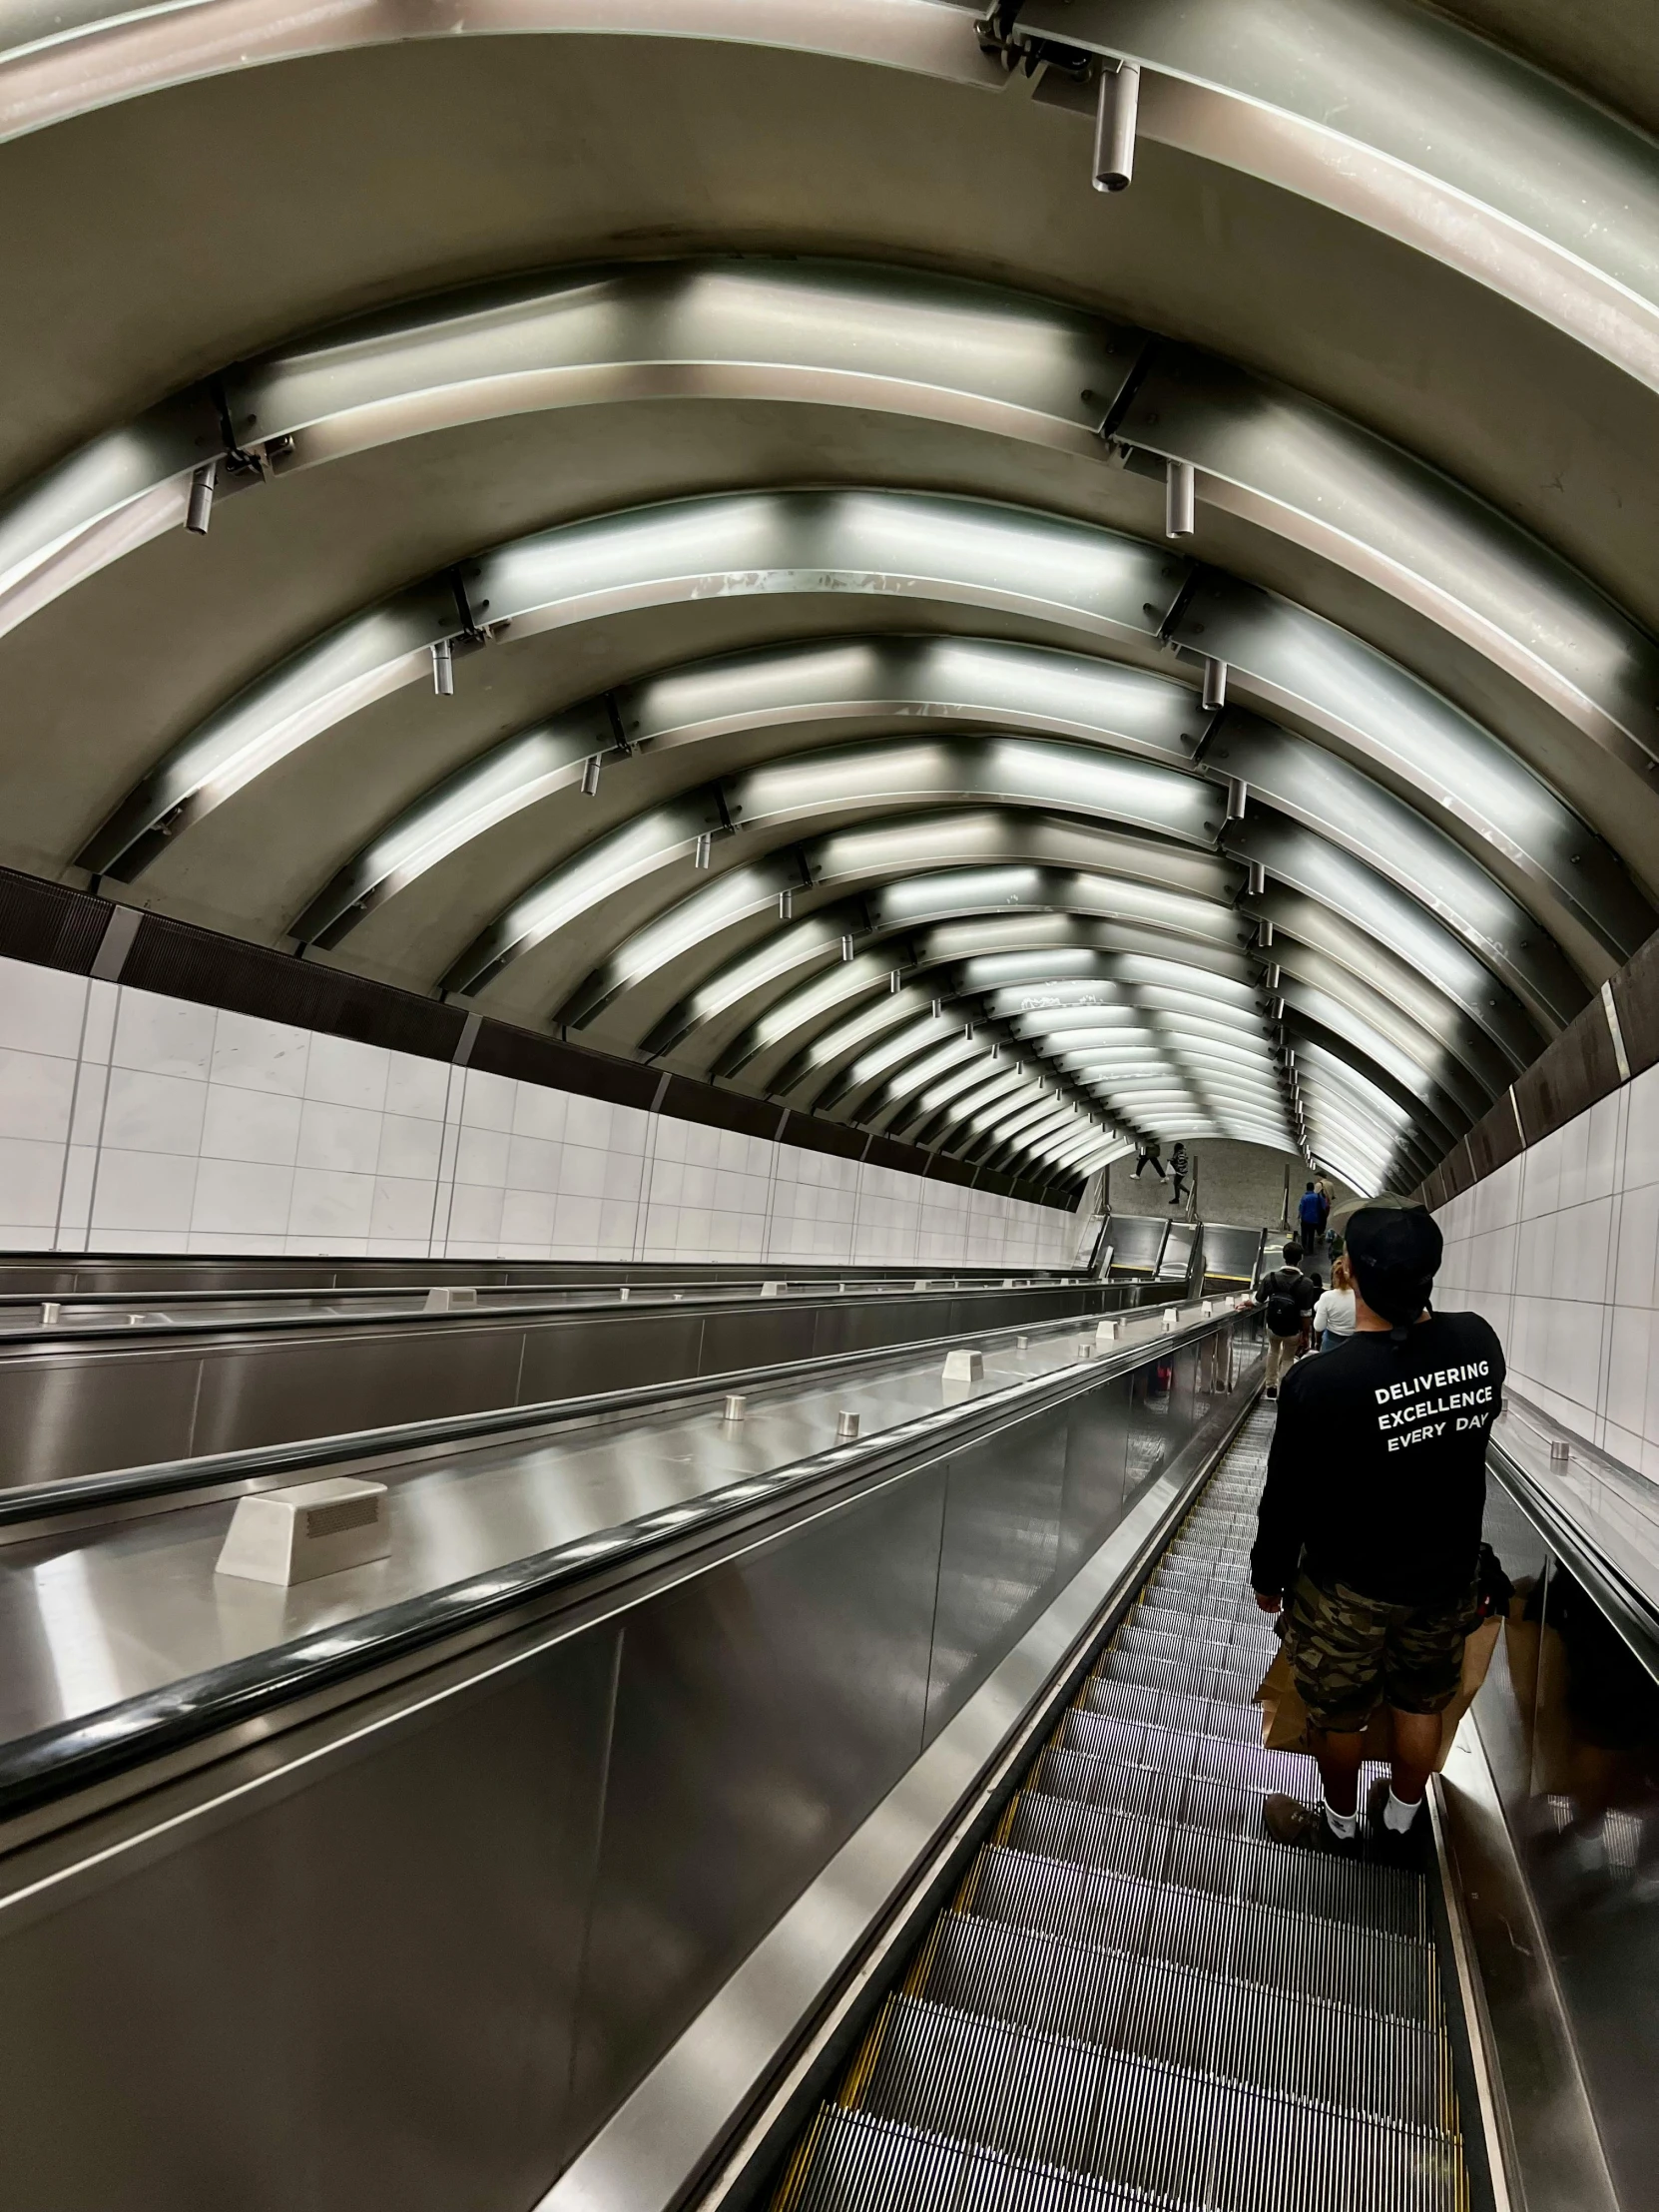 a person is standing on an escalator wearing black and white